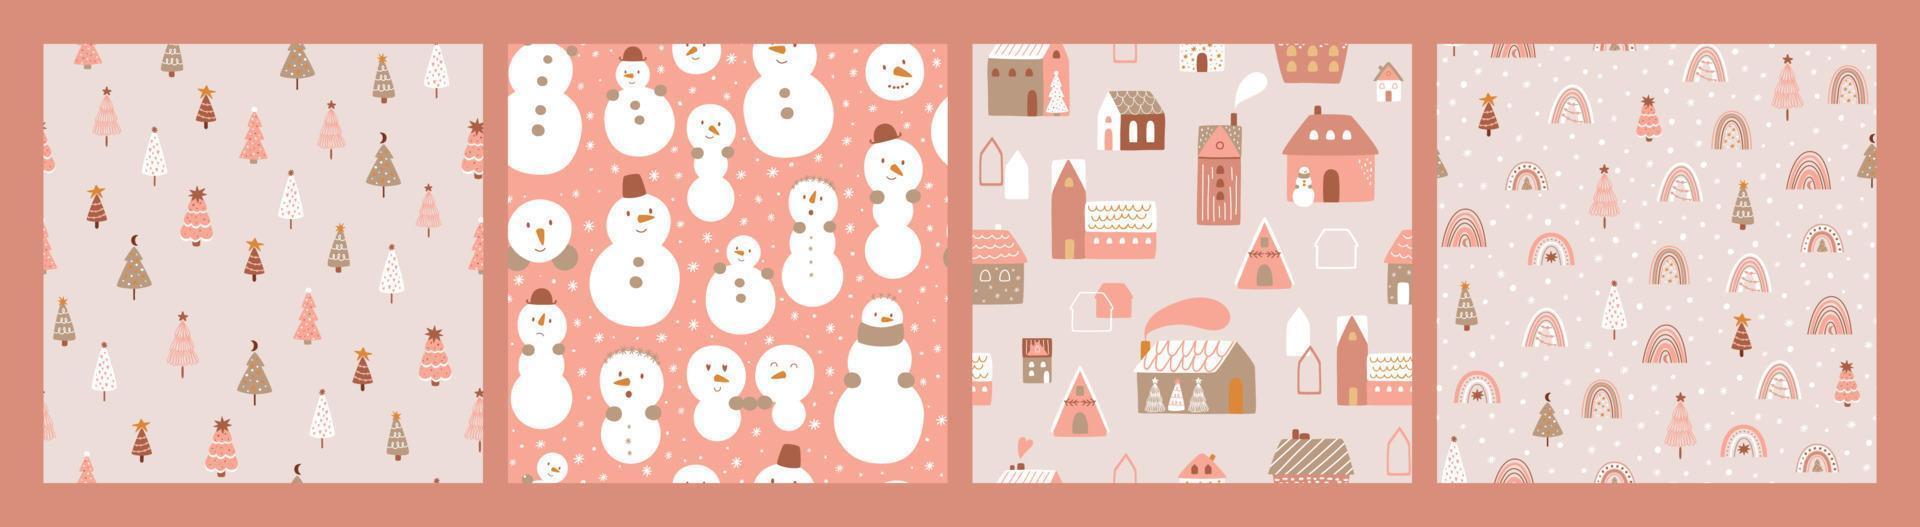 Pink Christmas pattern set. Pastel winter seamless repeated background. Christmas trees, houses, village, snowman, rainbow print collection. Cute New Year decor. Vector illustration. Winter paper.